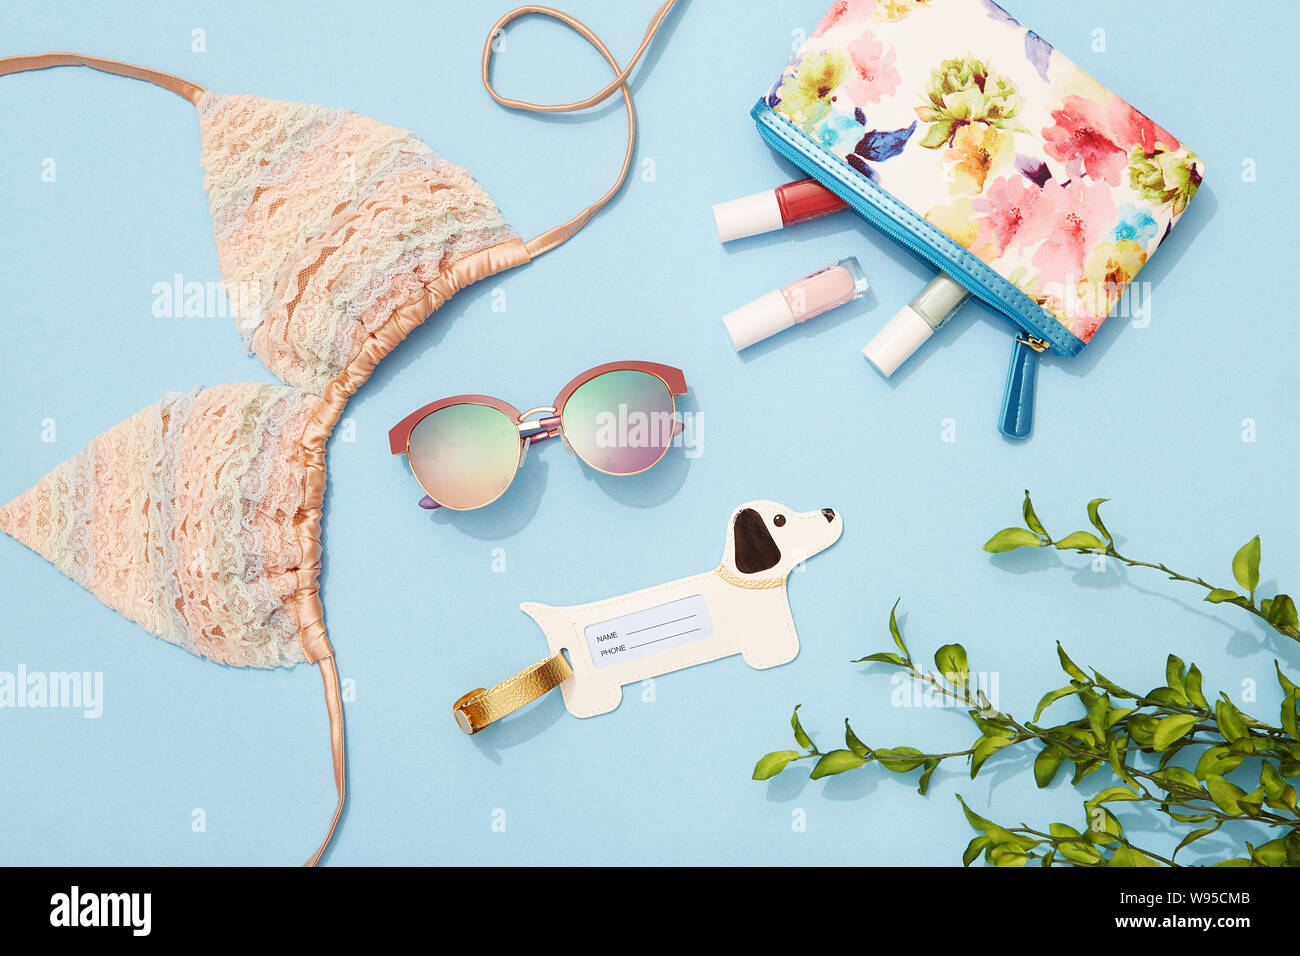 Young woman beach holiday fashion and beauty products and accessories flat lay on blue background Stock Photo